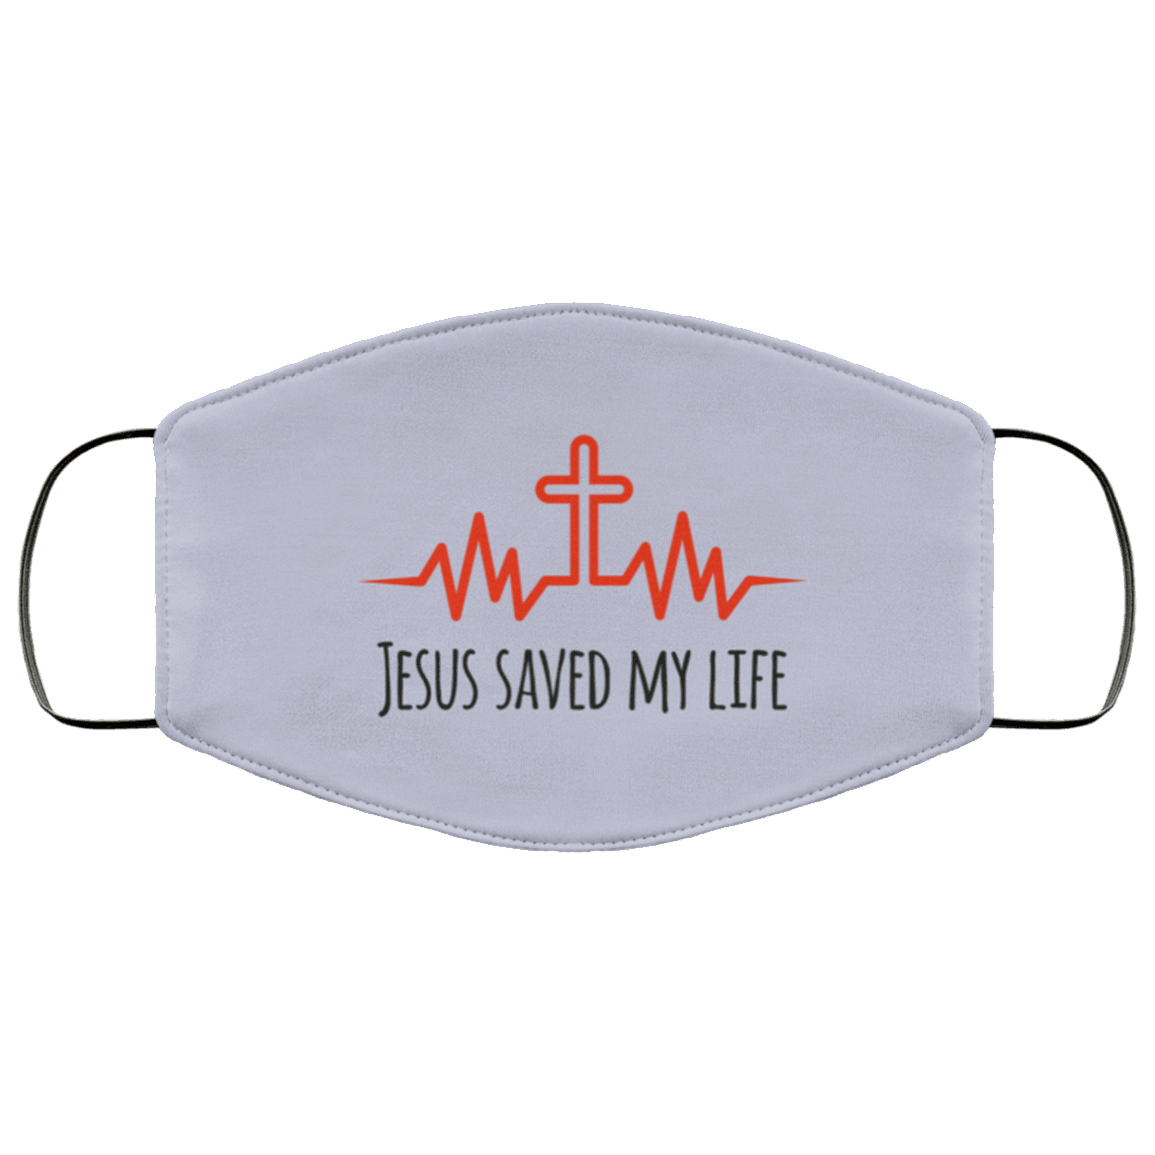 Designs by MyUtopia Shout Out:Jesus Saved My Life Adult Fabric Face Mask with Elastic Ear Loops,3 Layer Fabric Face Mask / Grey / Adult,Fabric Face Mask